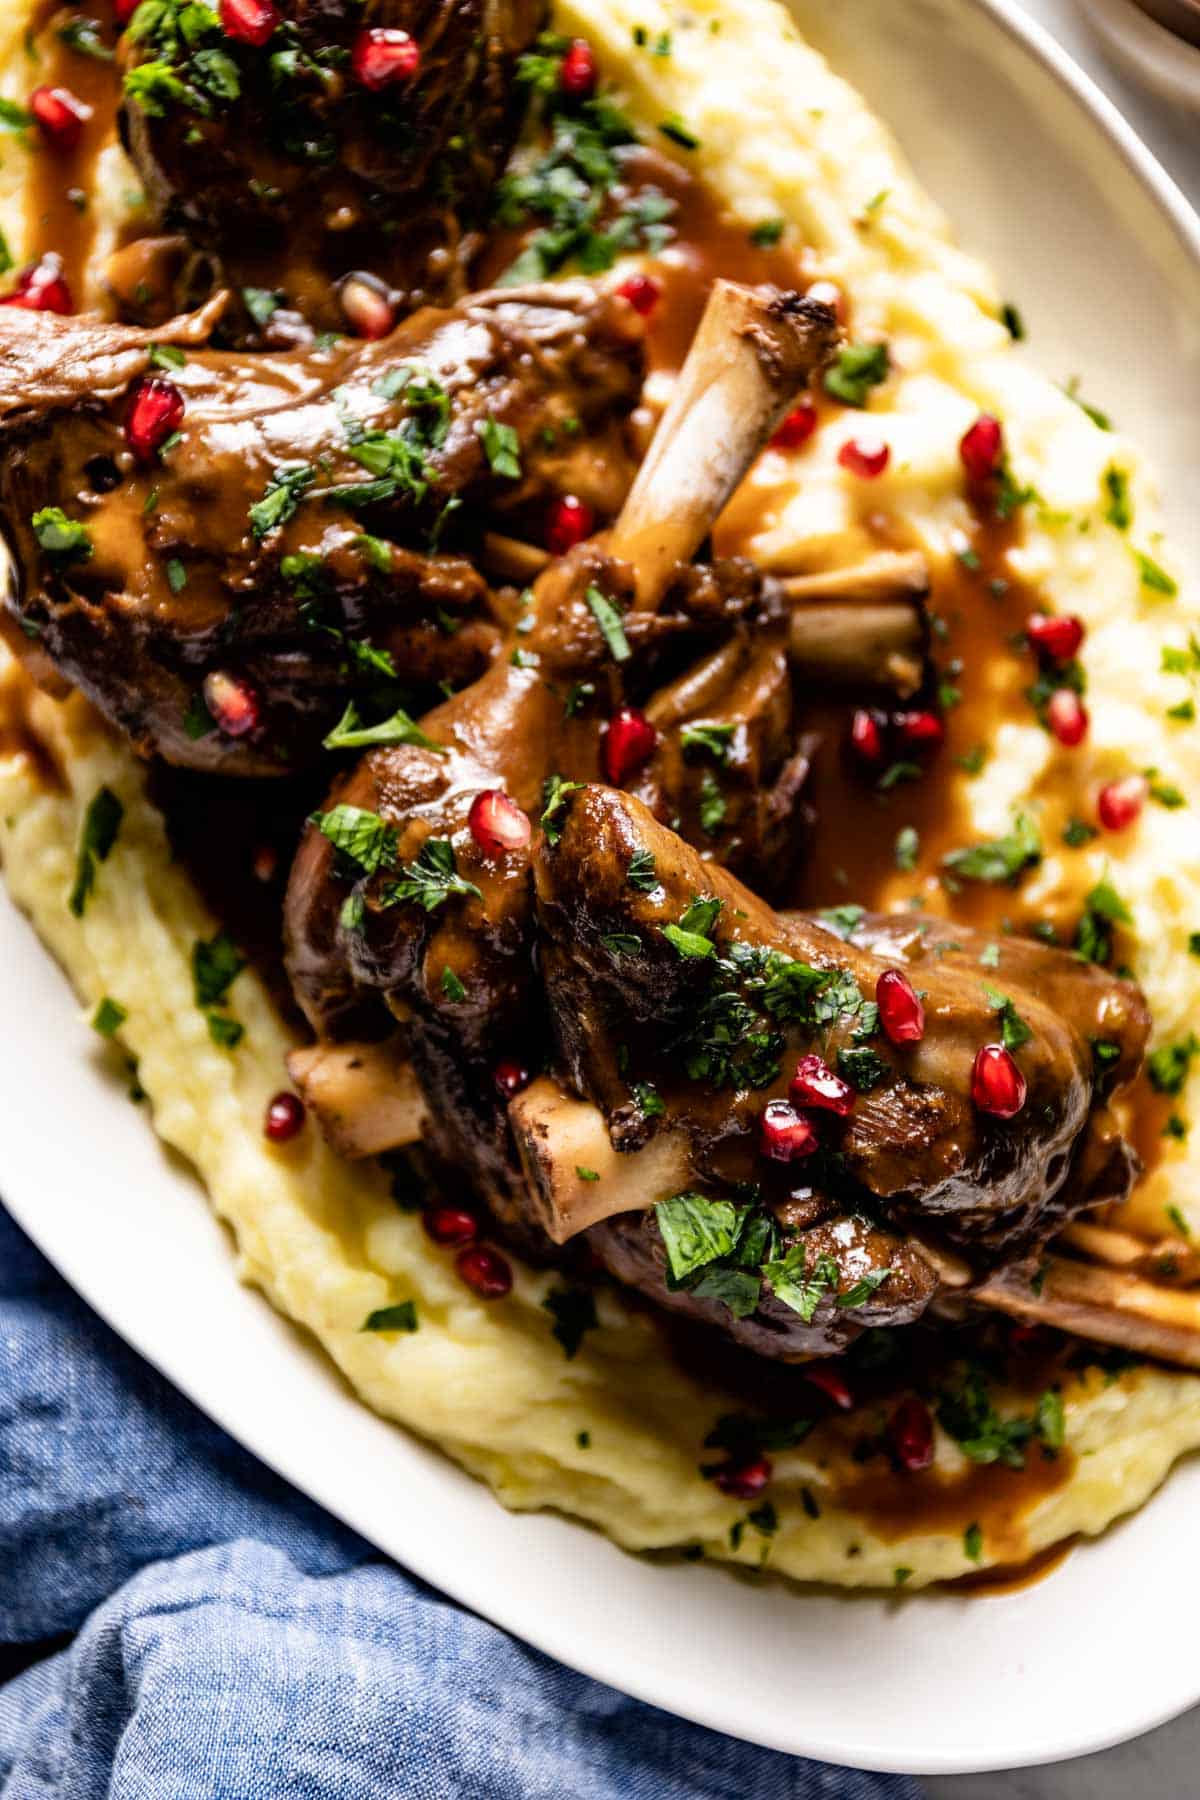 A close up view of cooked lamb garnished with pomegranate seeds.